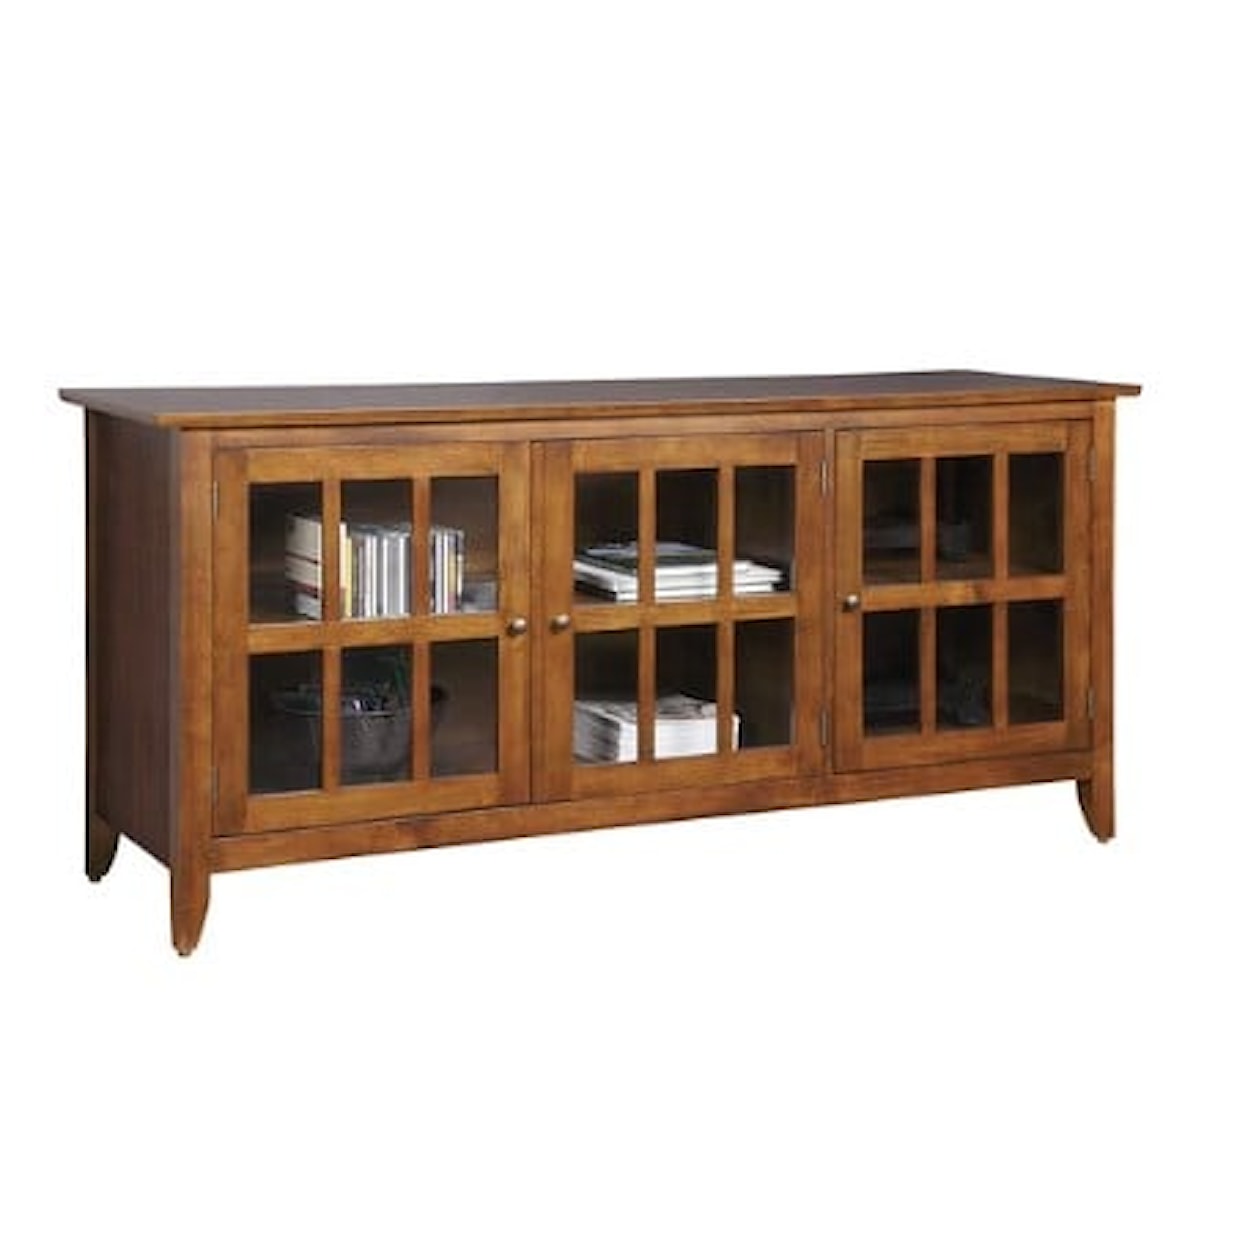 Stickley Nichols and Stone Collection CARLISLE TV CONSOLE